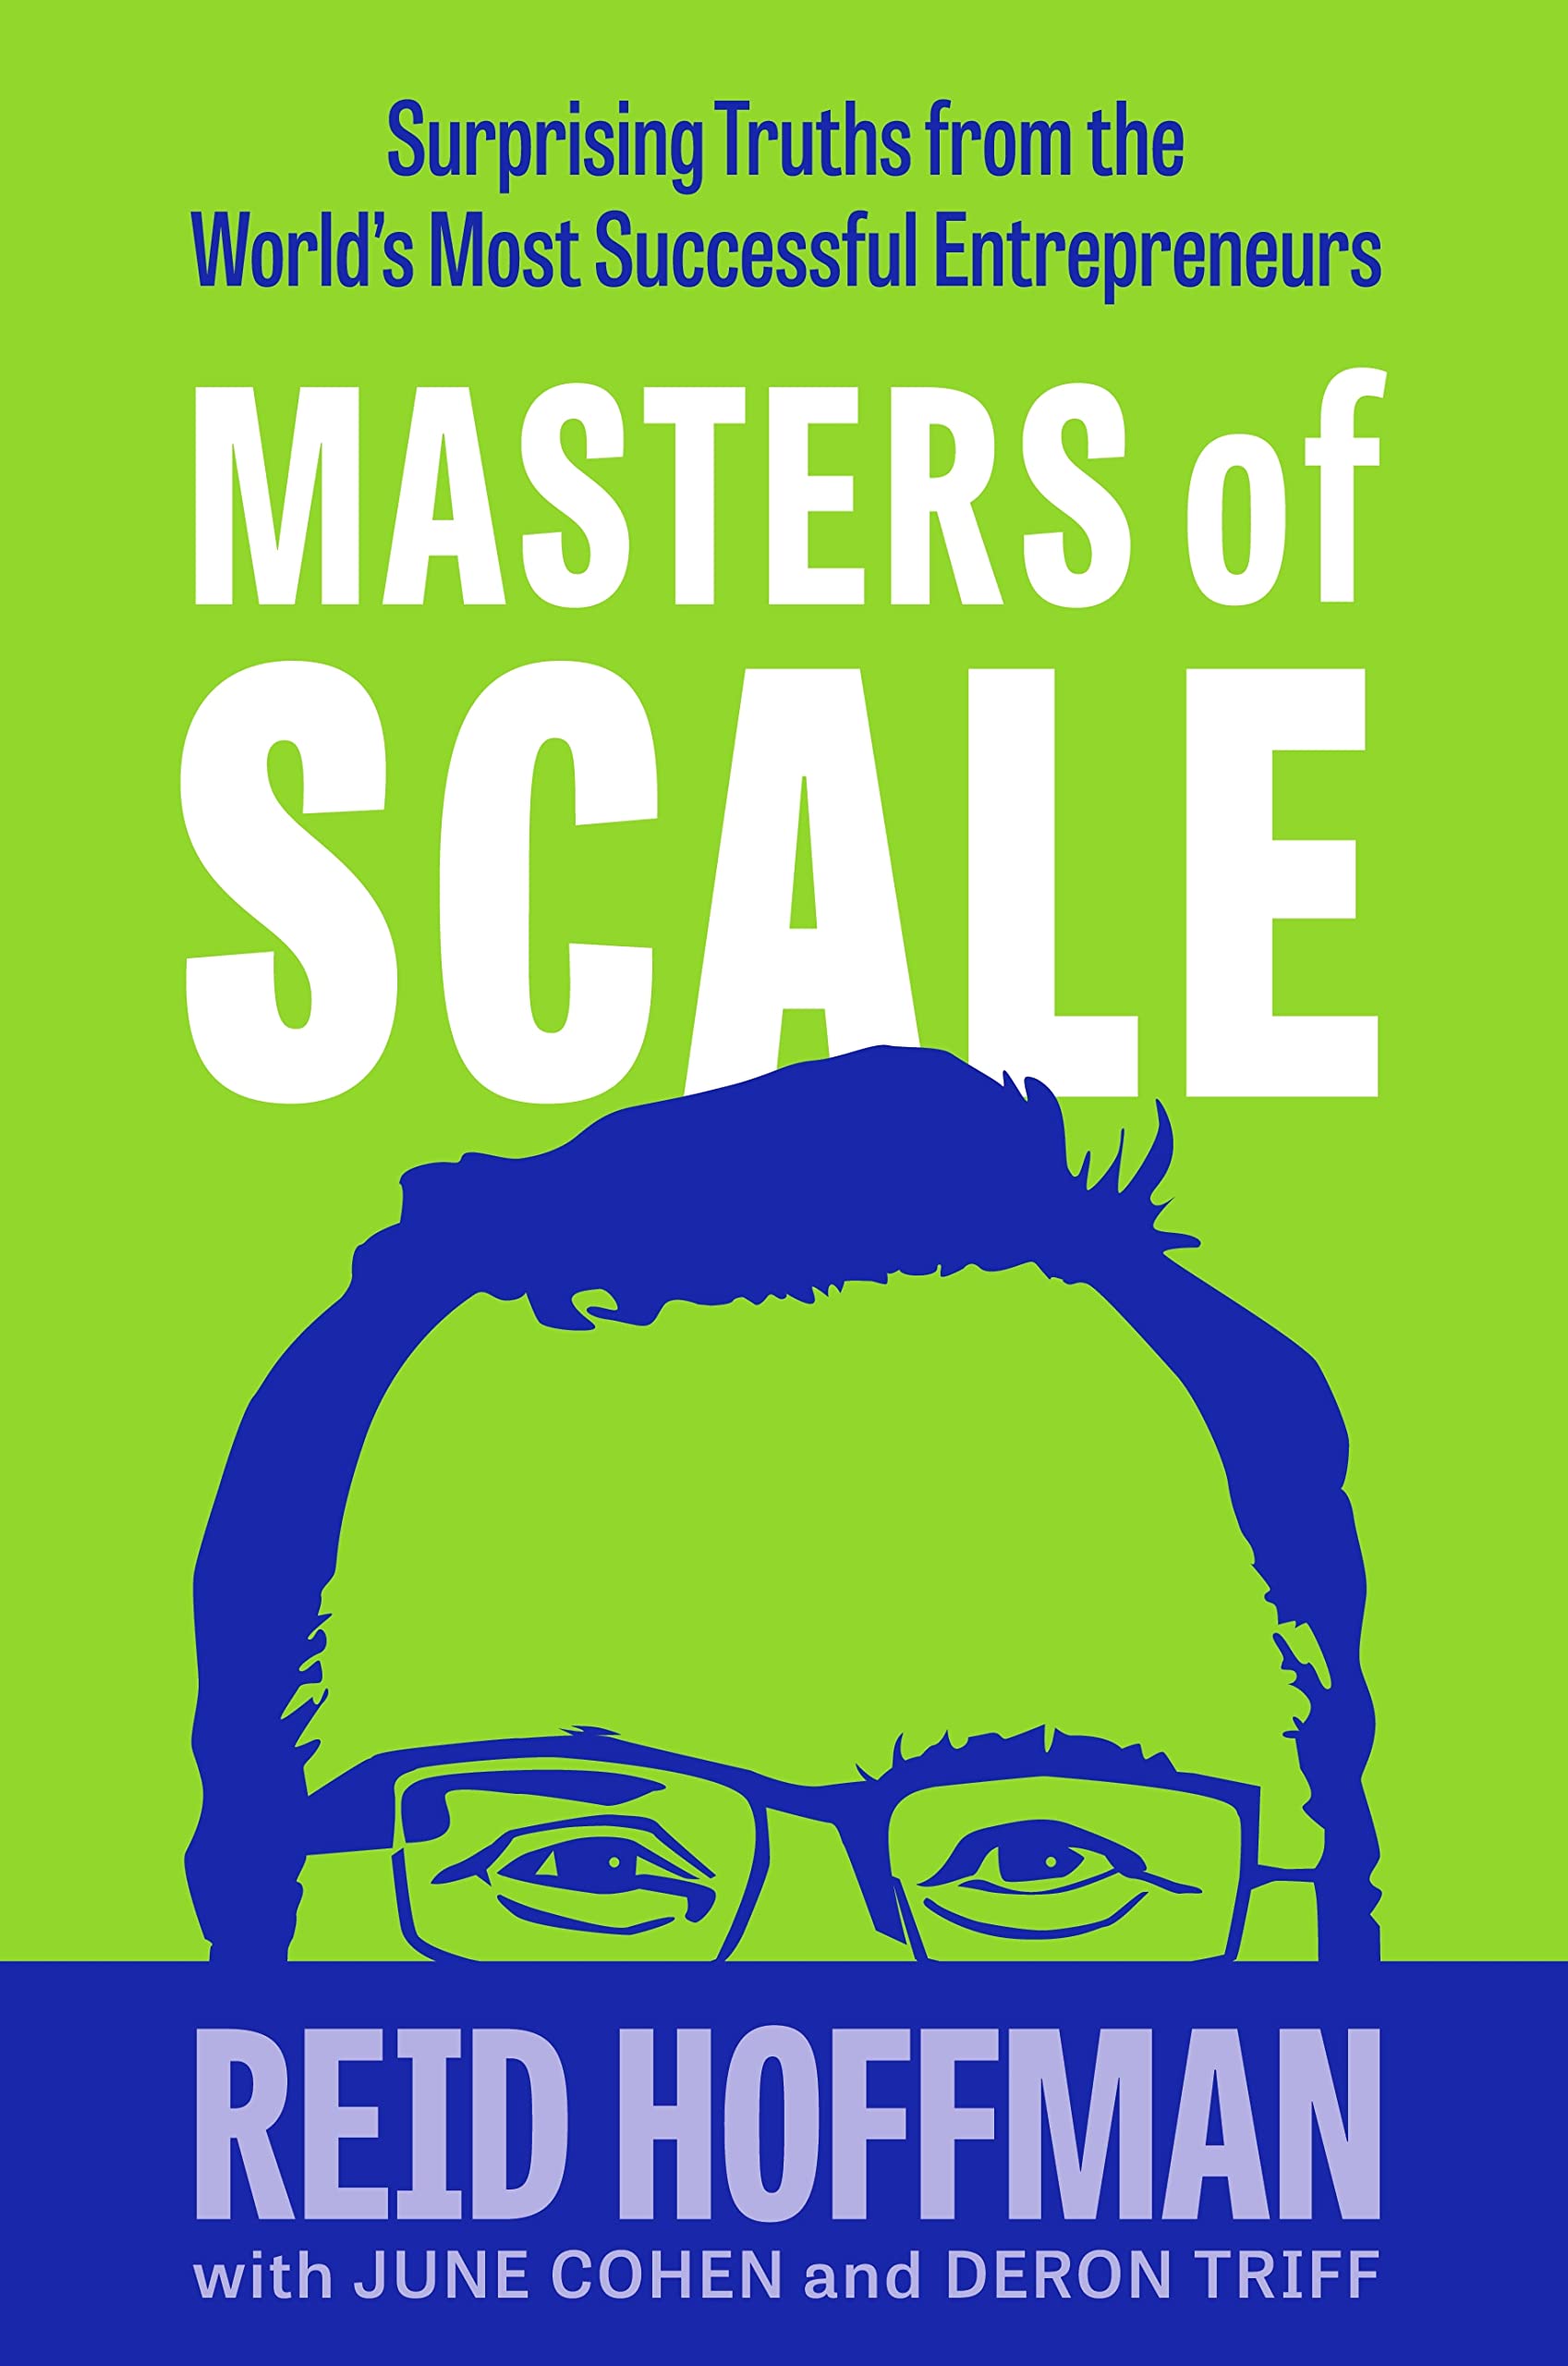 Masters of Scale : Surprising truths from the worlds most successful entrepreneurs (Hardcover)